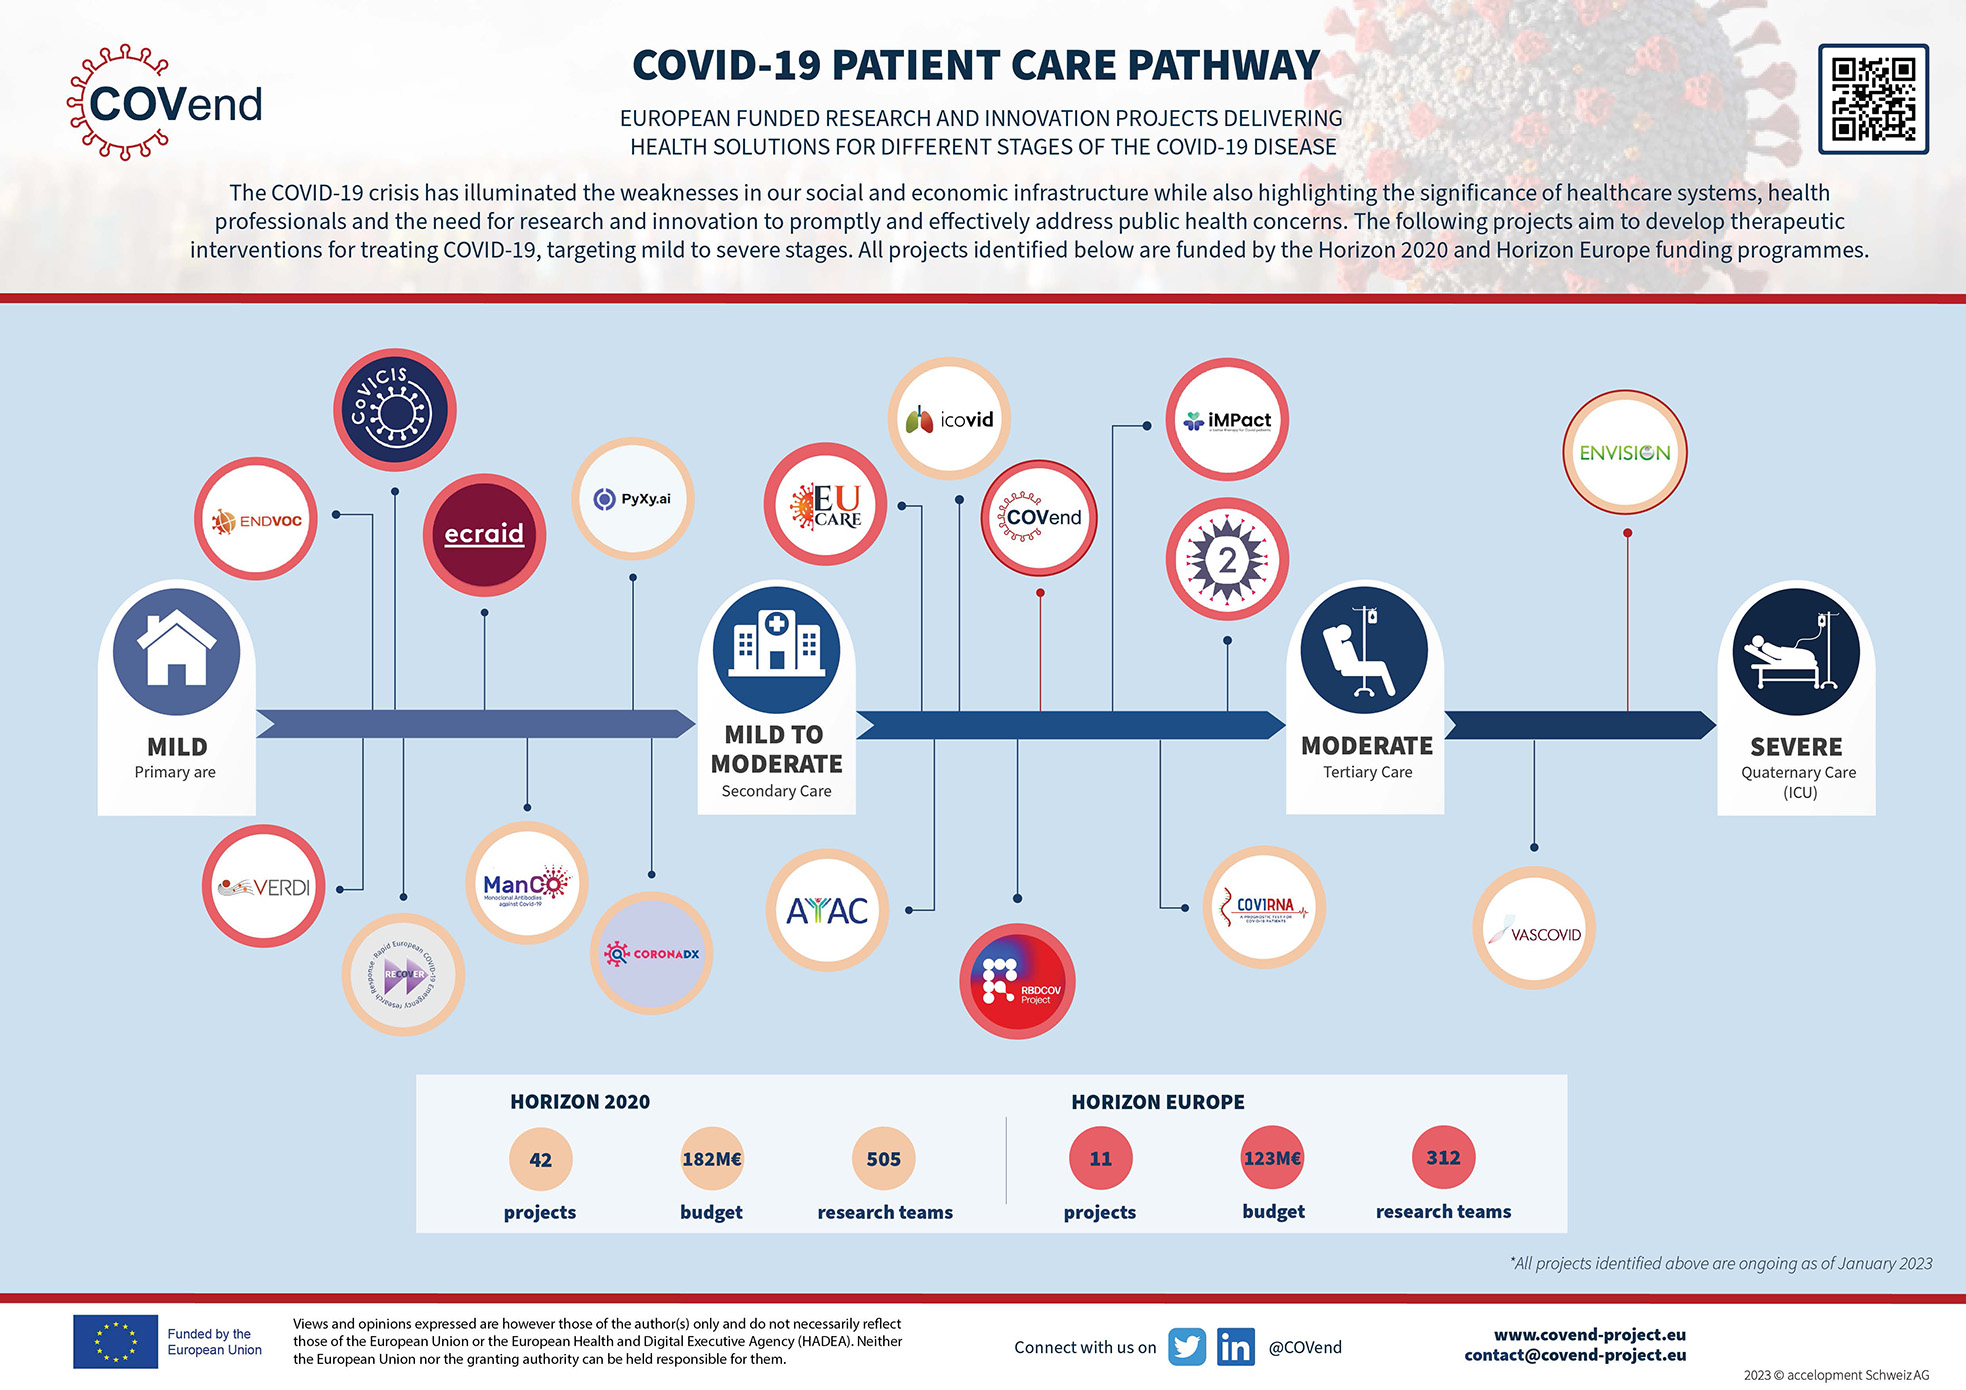 European funded research and innovation projects delivering health solutions for different stages of the COVID-19 disease